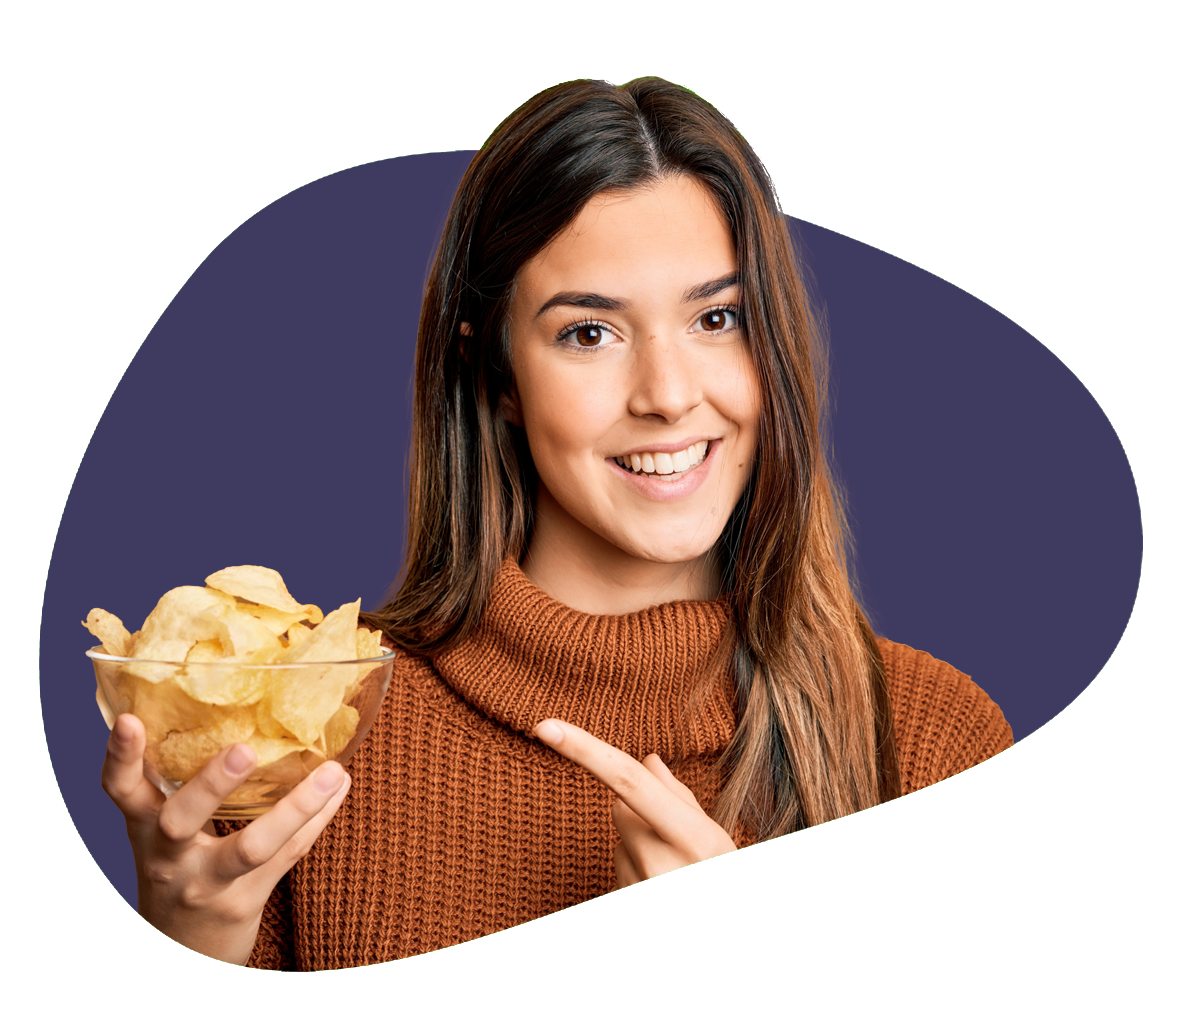 Person holds a bowl of chips in their hand while pointing to it with the other.